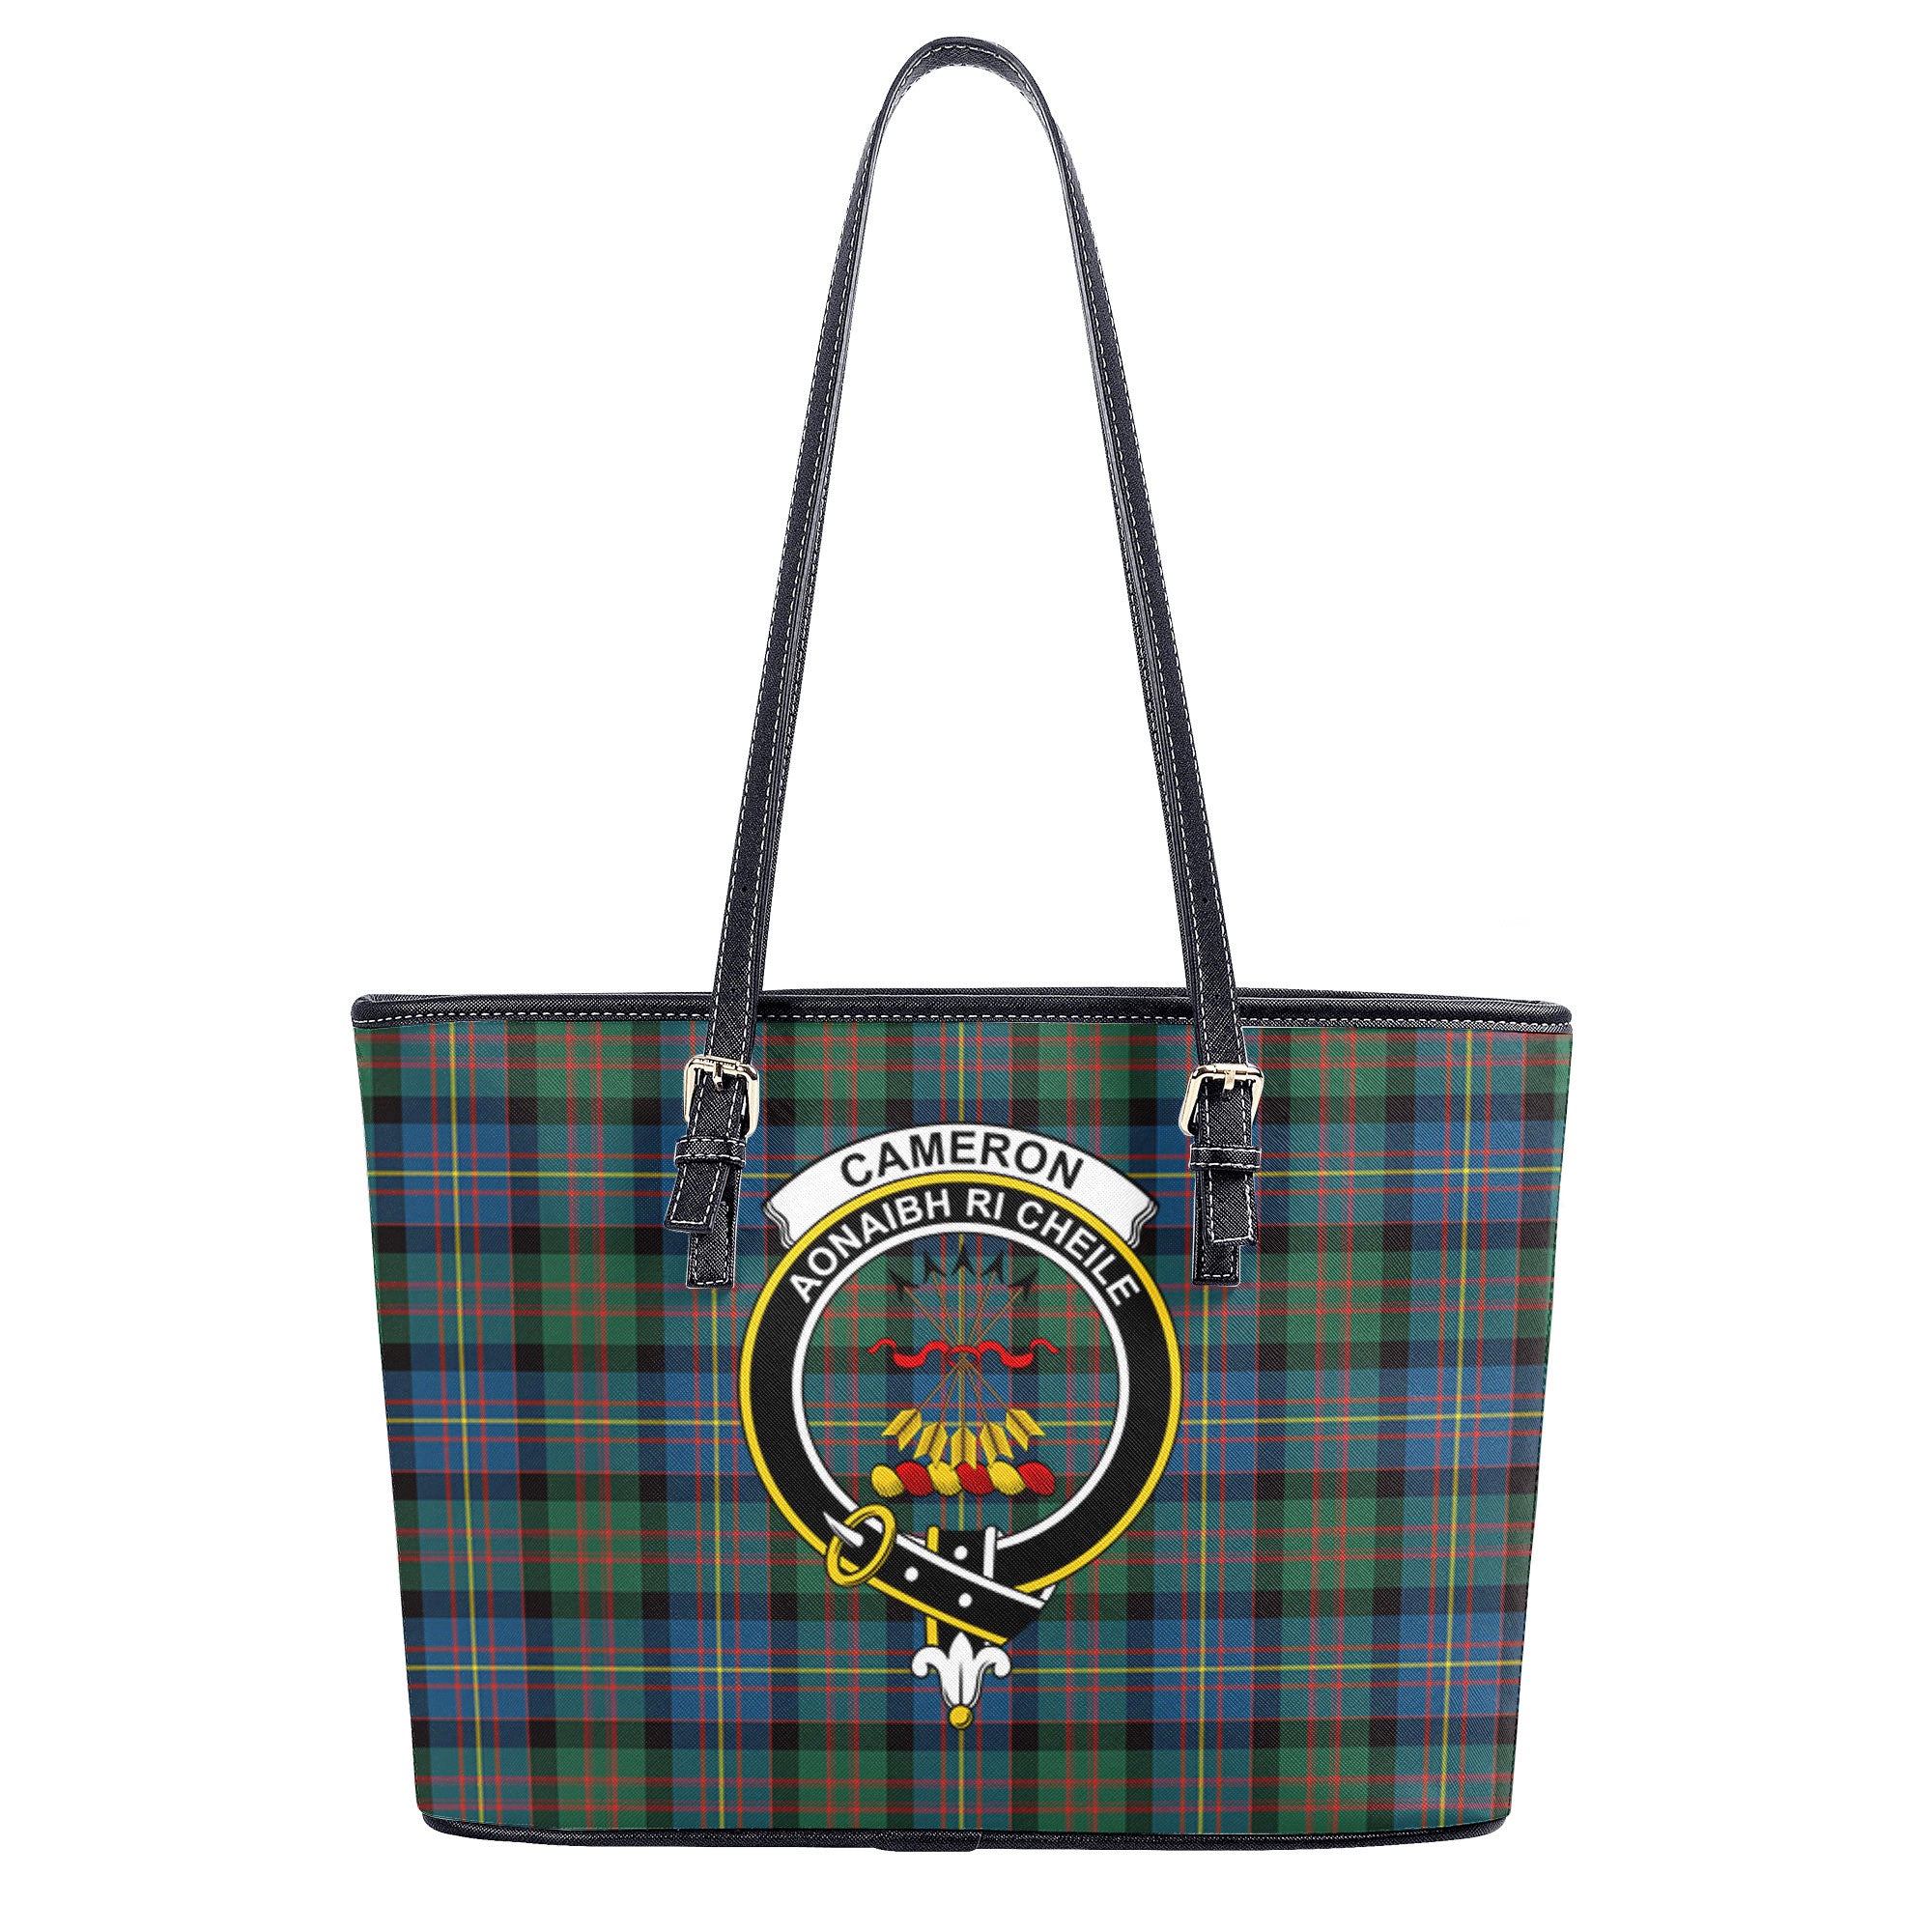 Cameron of Erracht Ancient Tartan Crest Leather Tote Bag